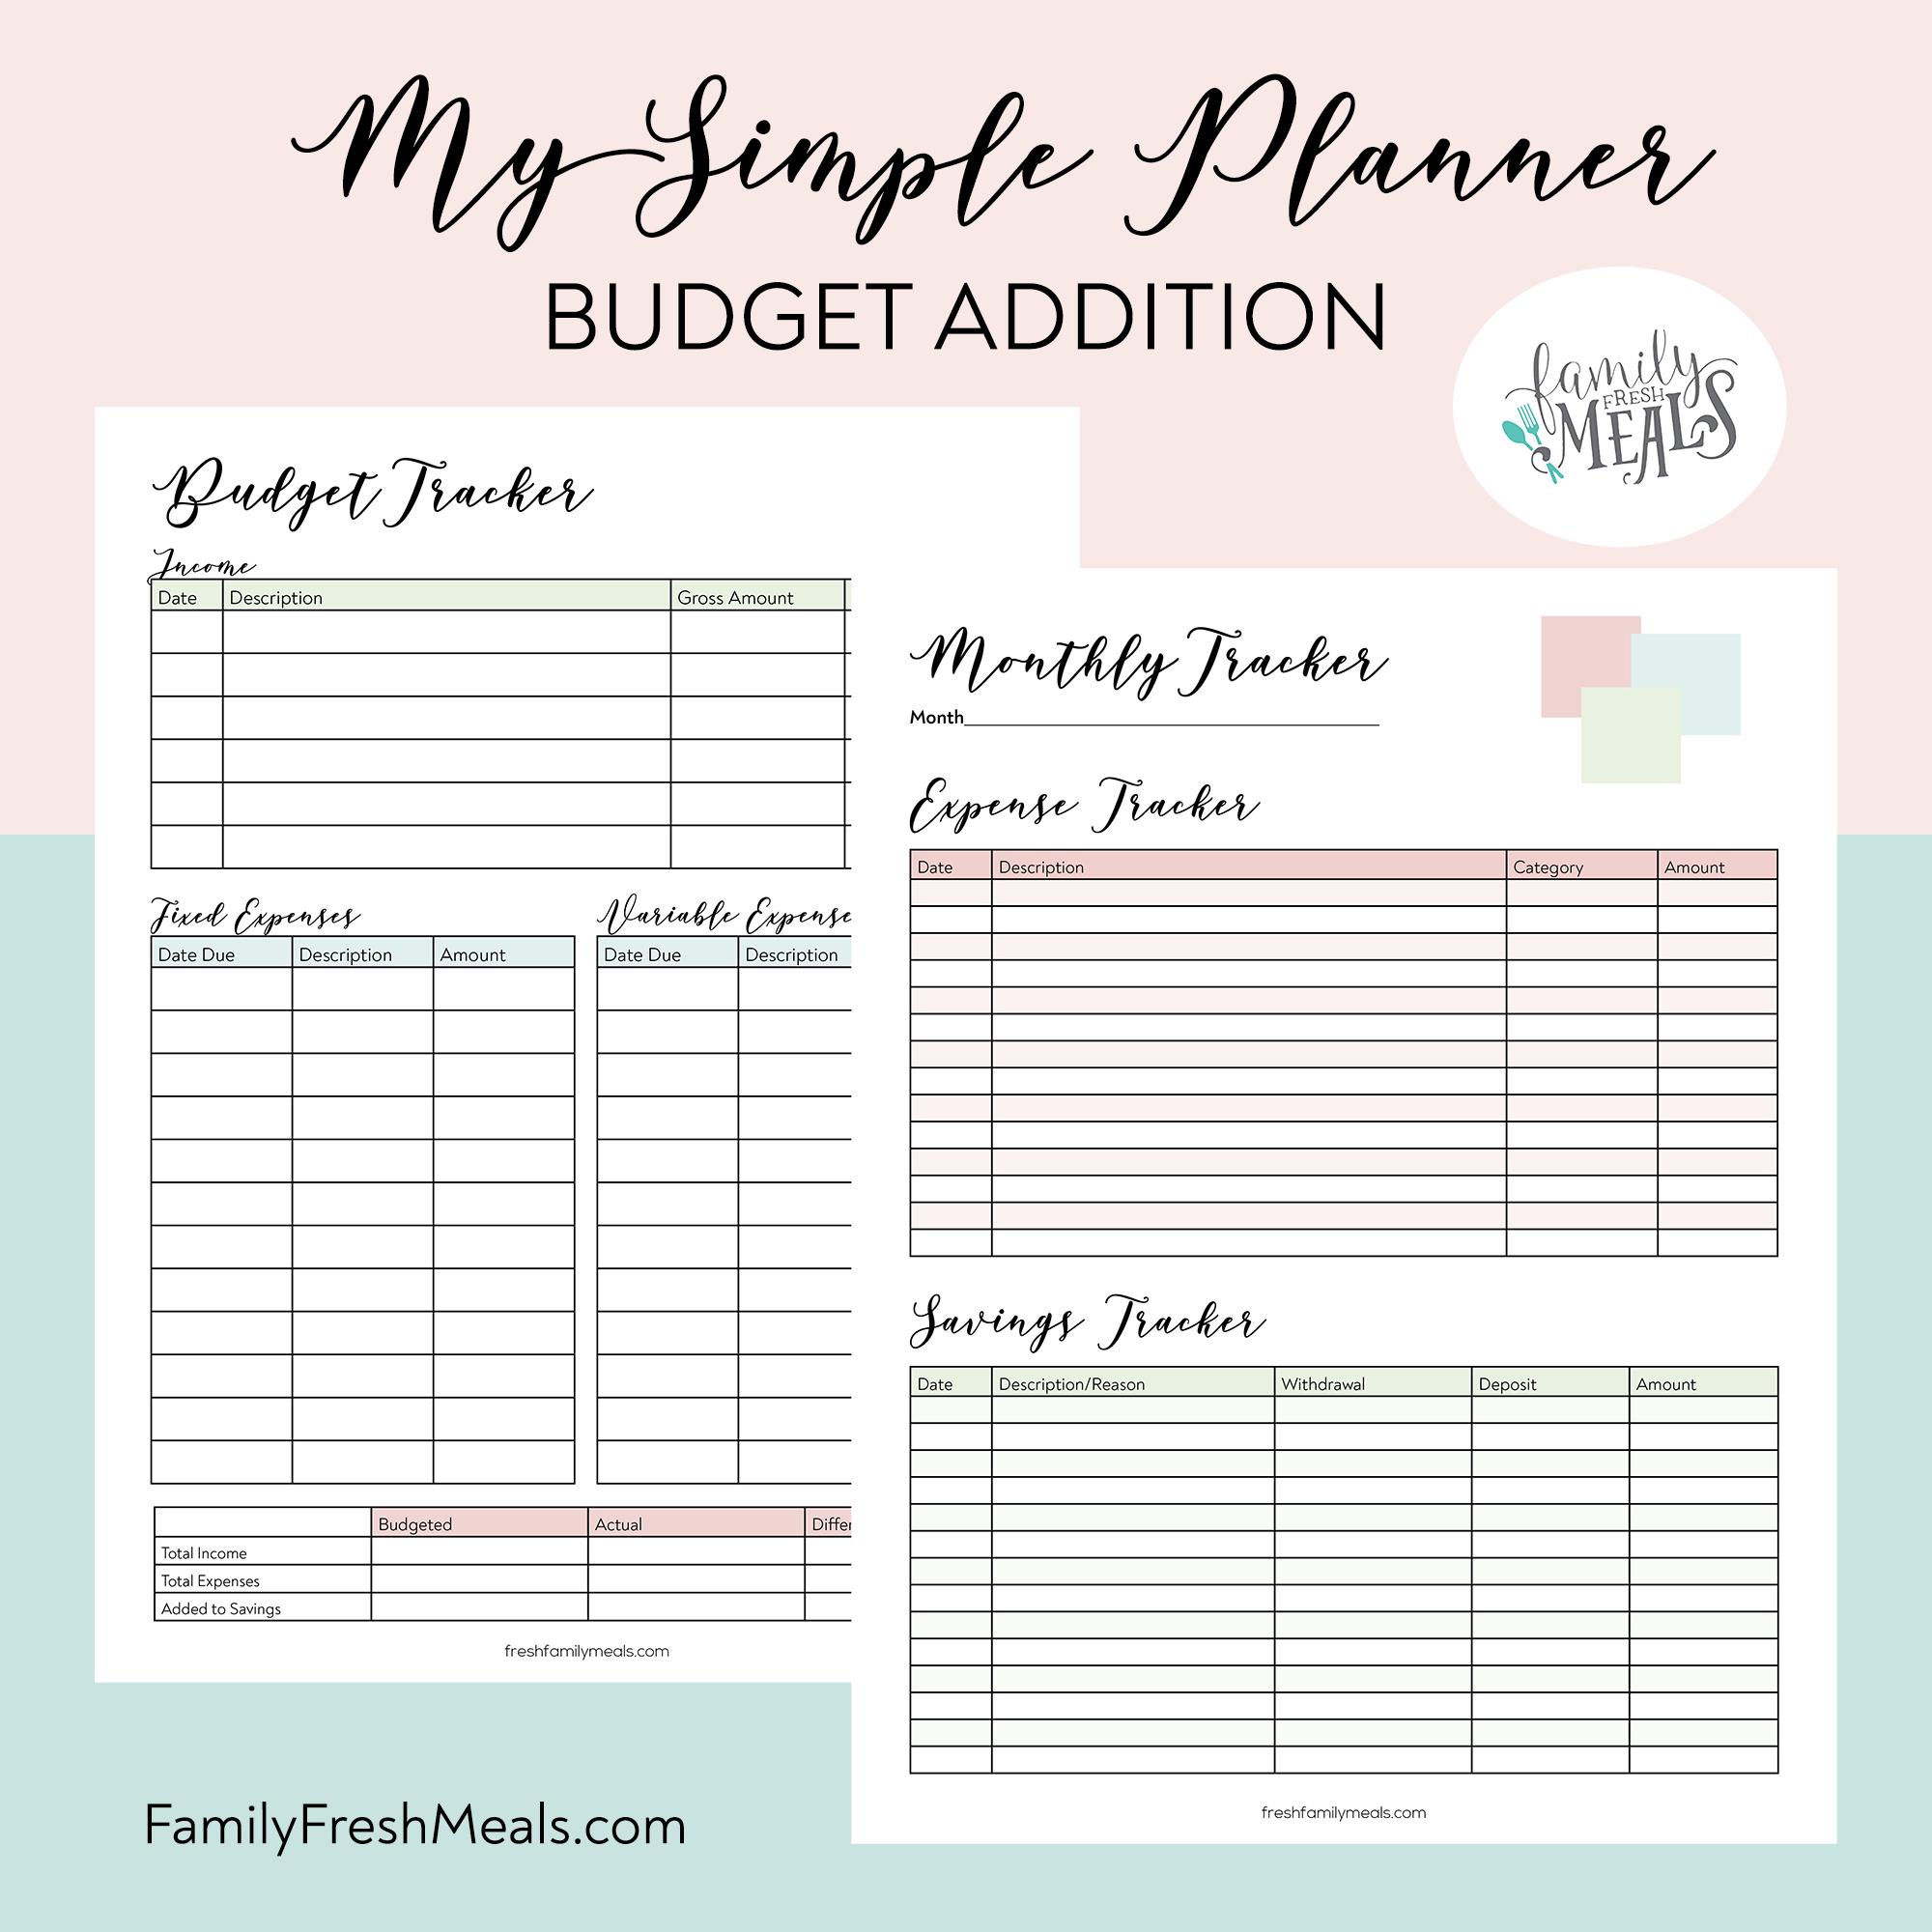 My Simple Planner Budget Tracker Addition - Family Fresh Meals